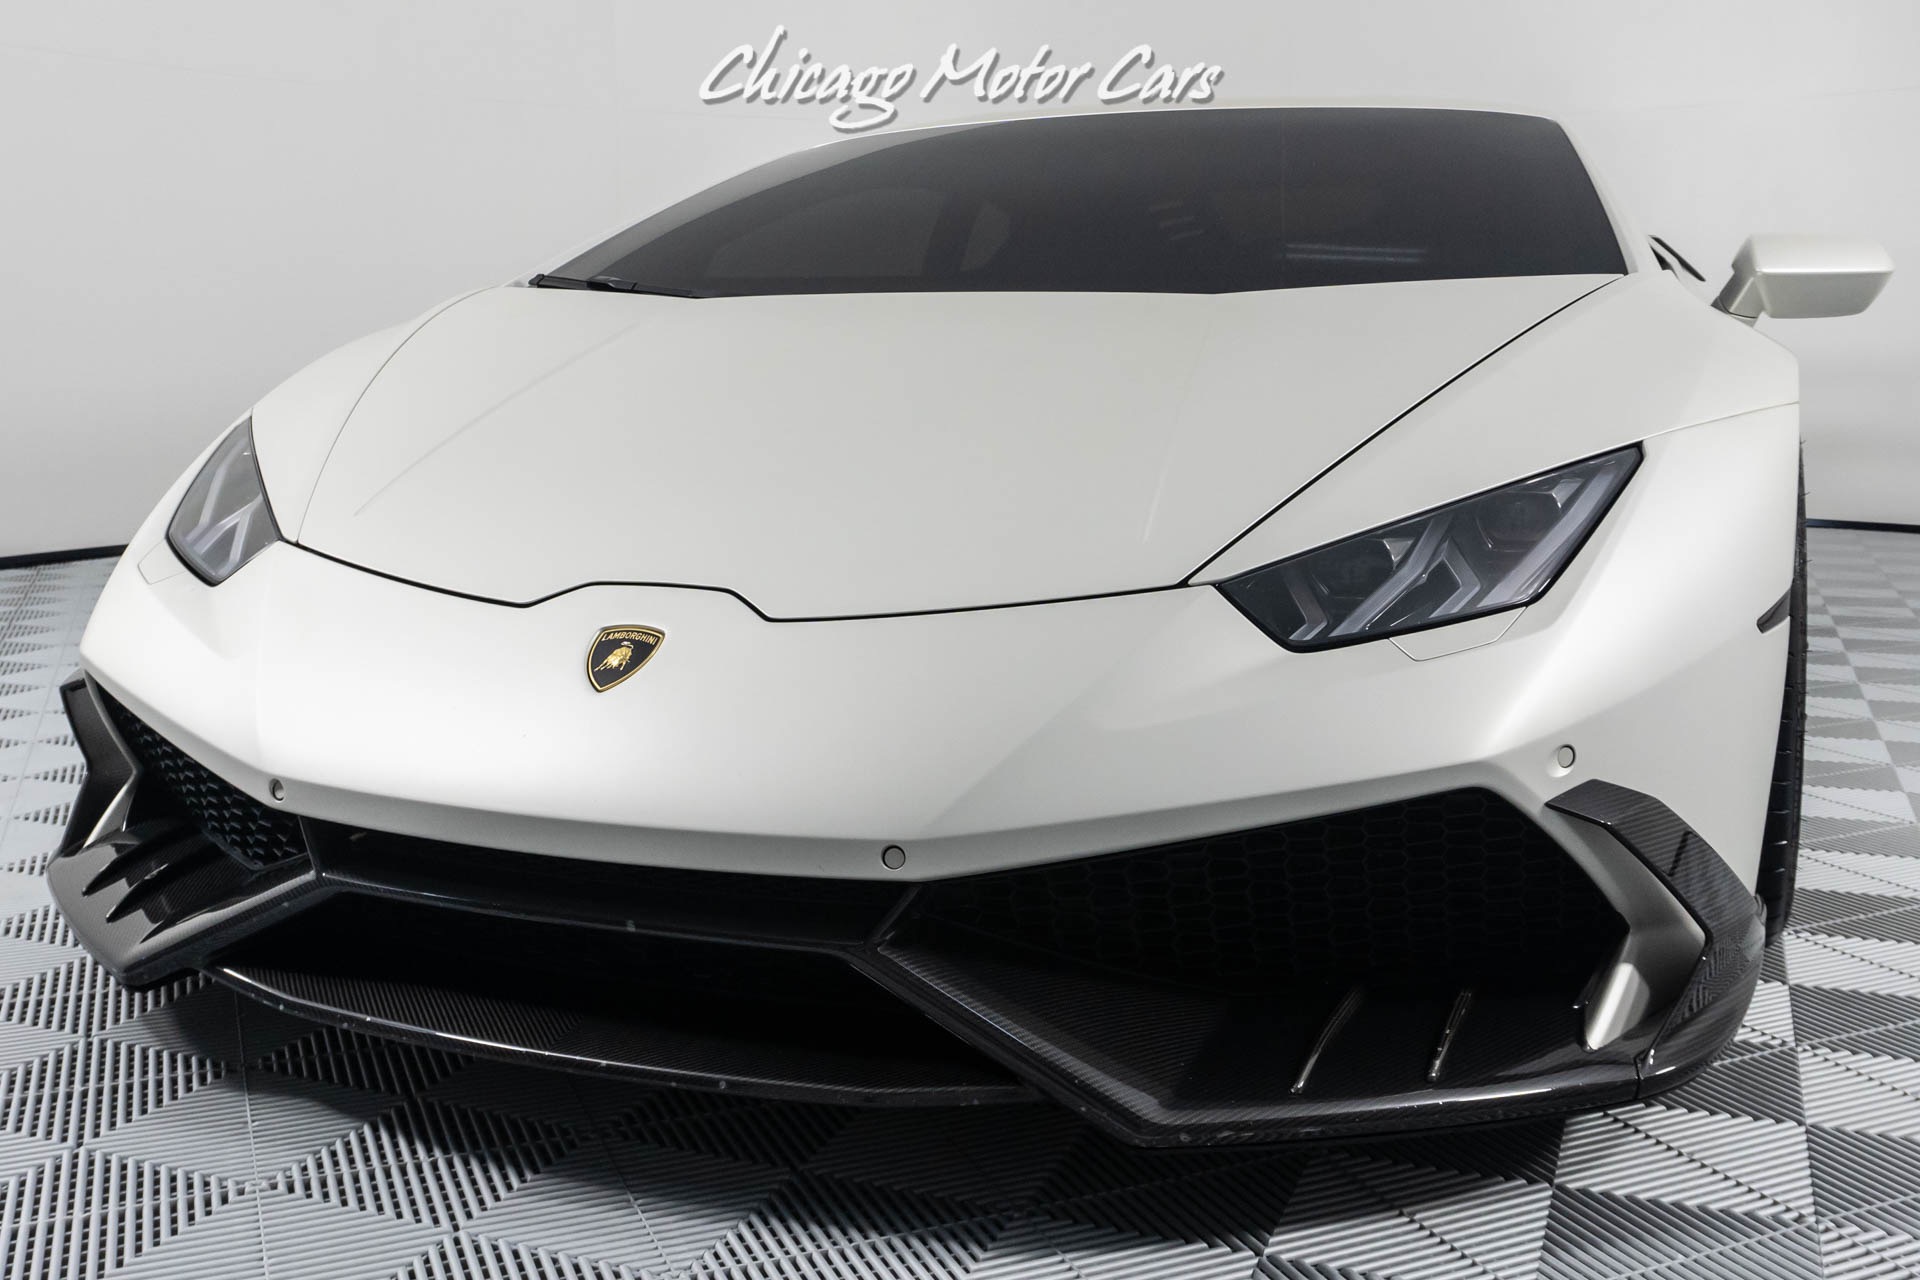 Used-2015-Lamborghini-Huracan-LP-610-4-Coupe-Mansory-Carbon-Kit-LOW-Miles-NEARLY-100K-Invested